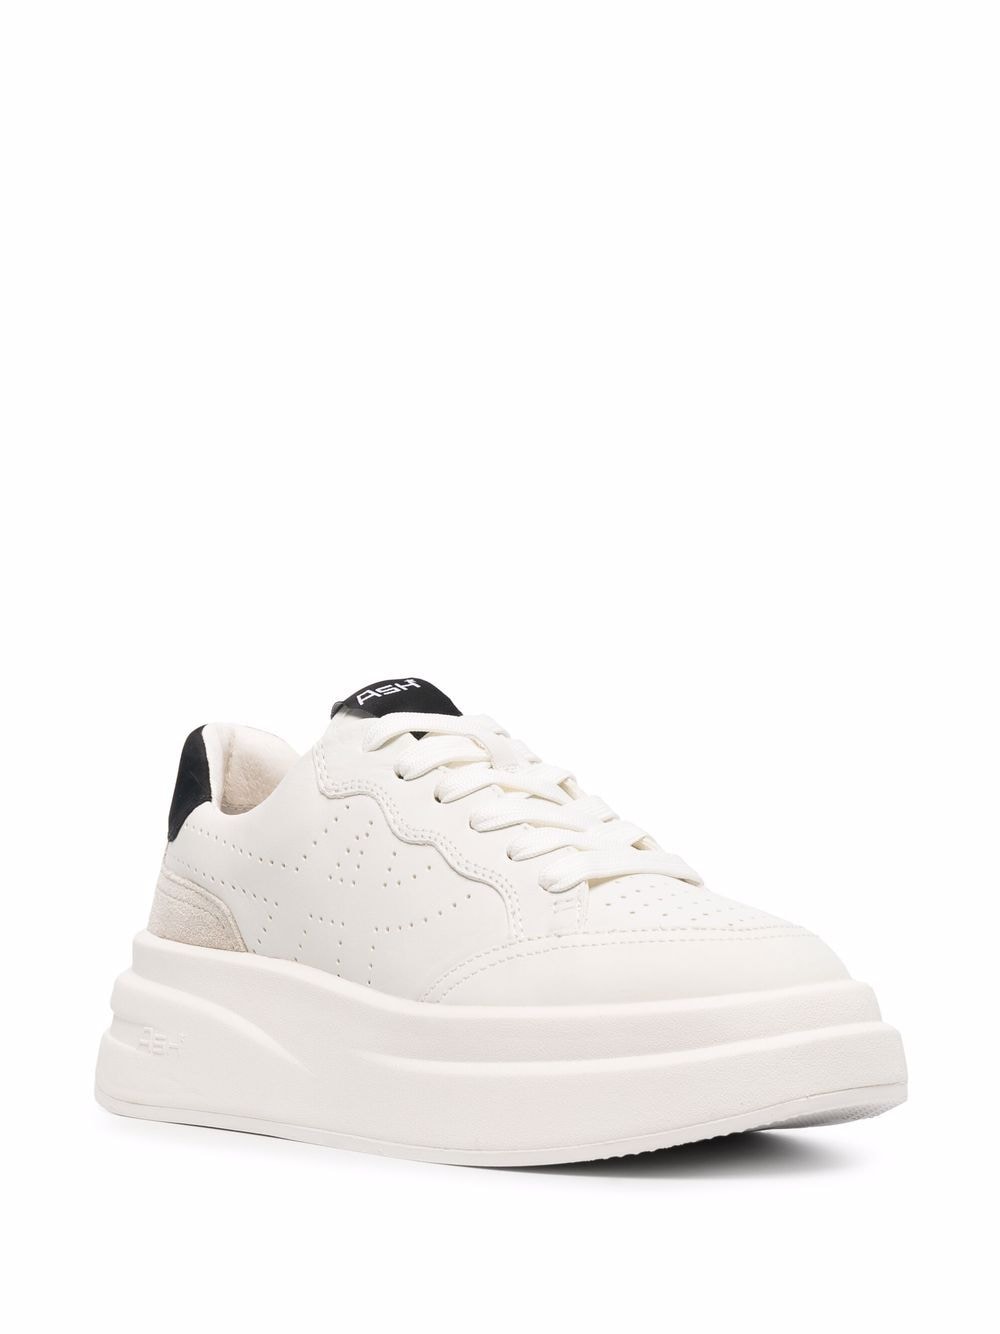 Talc white/black leather panelled lace-up sneakers